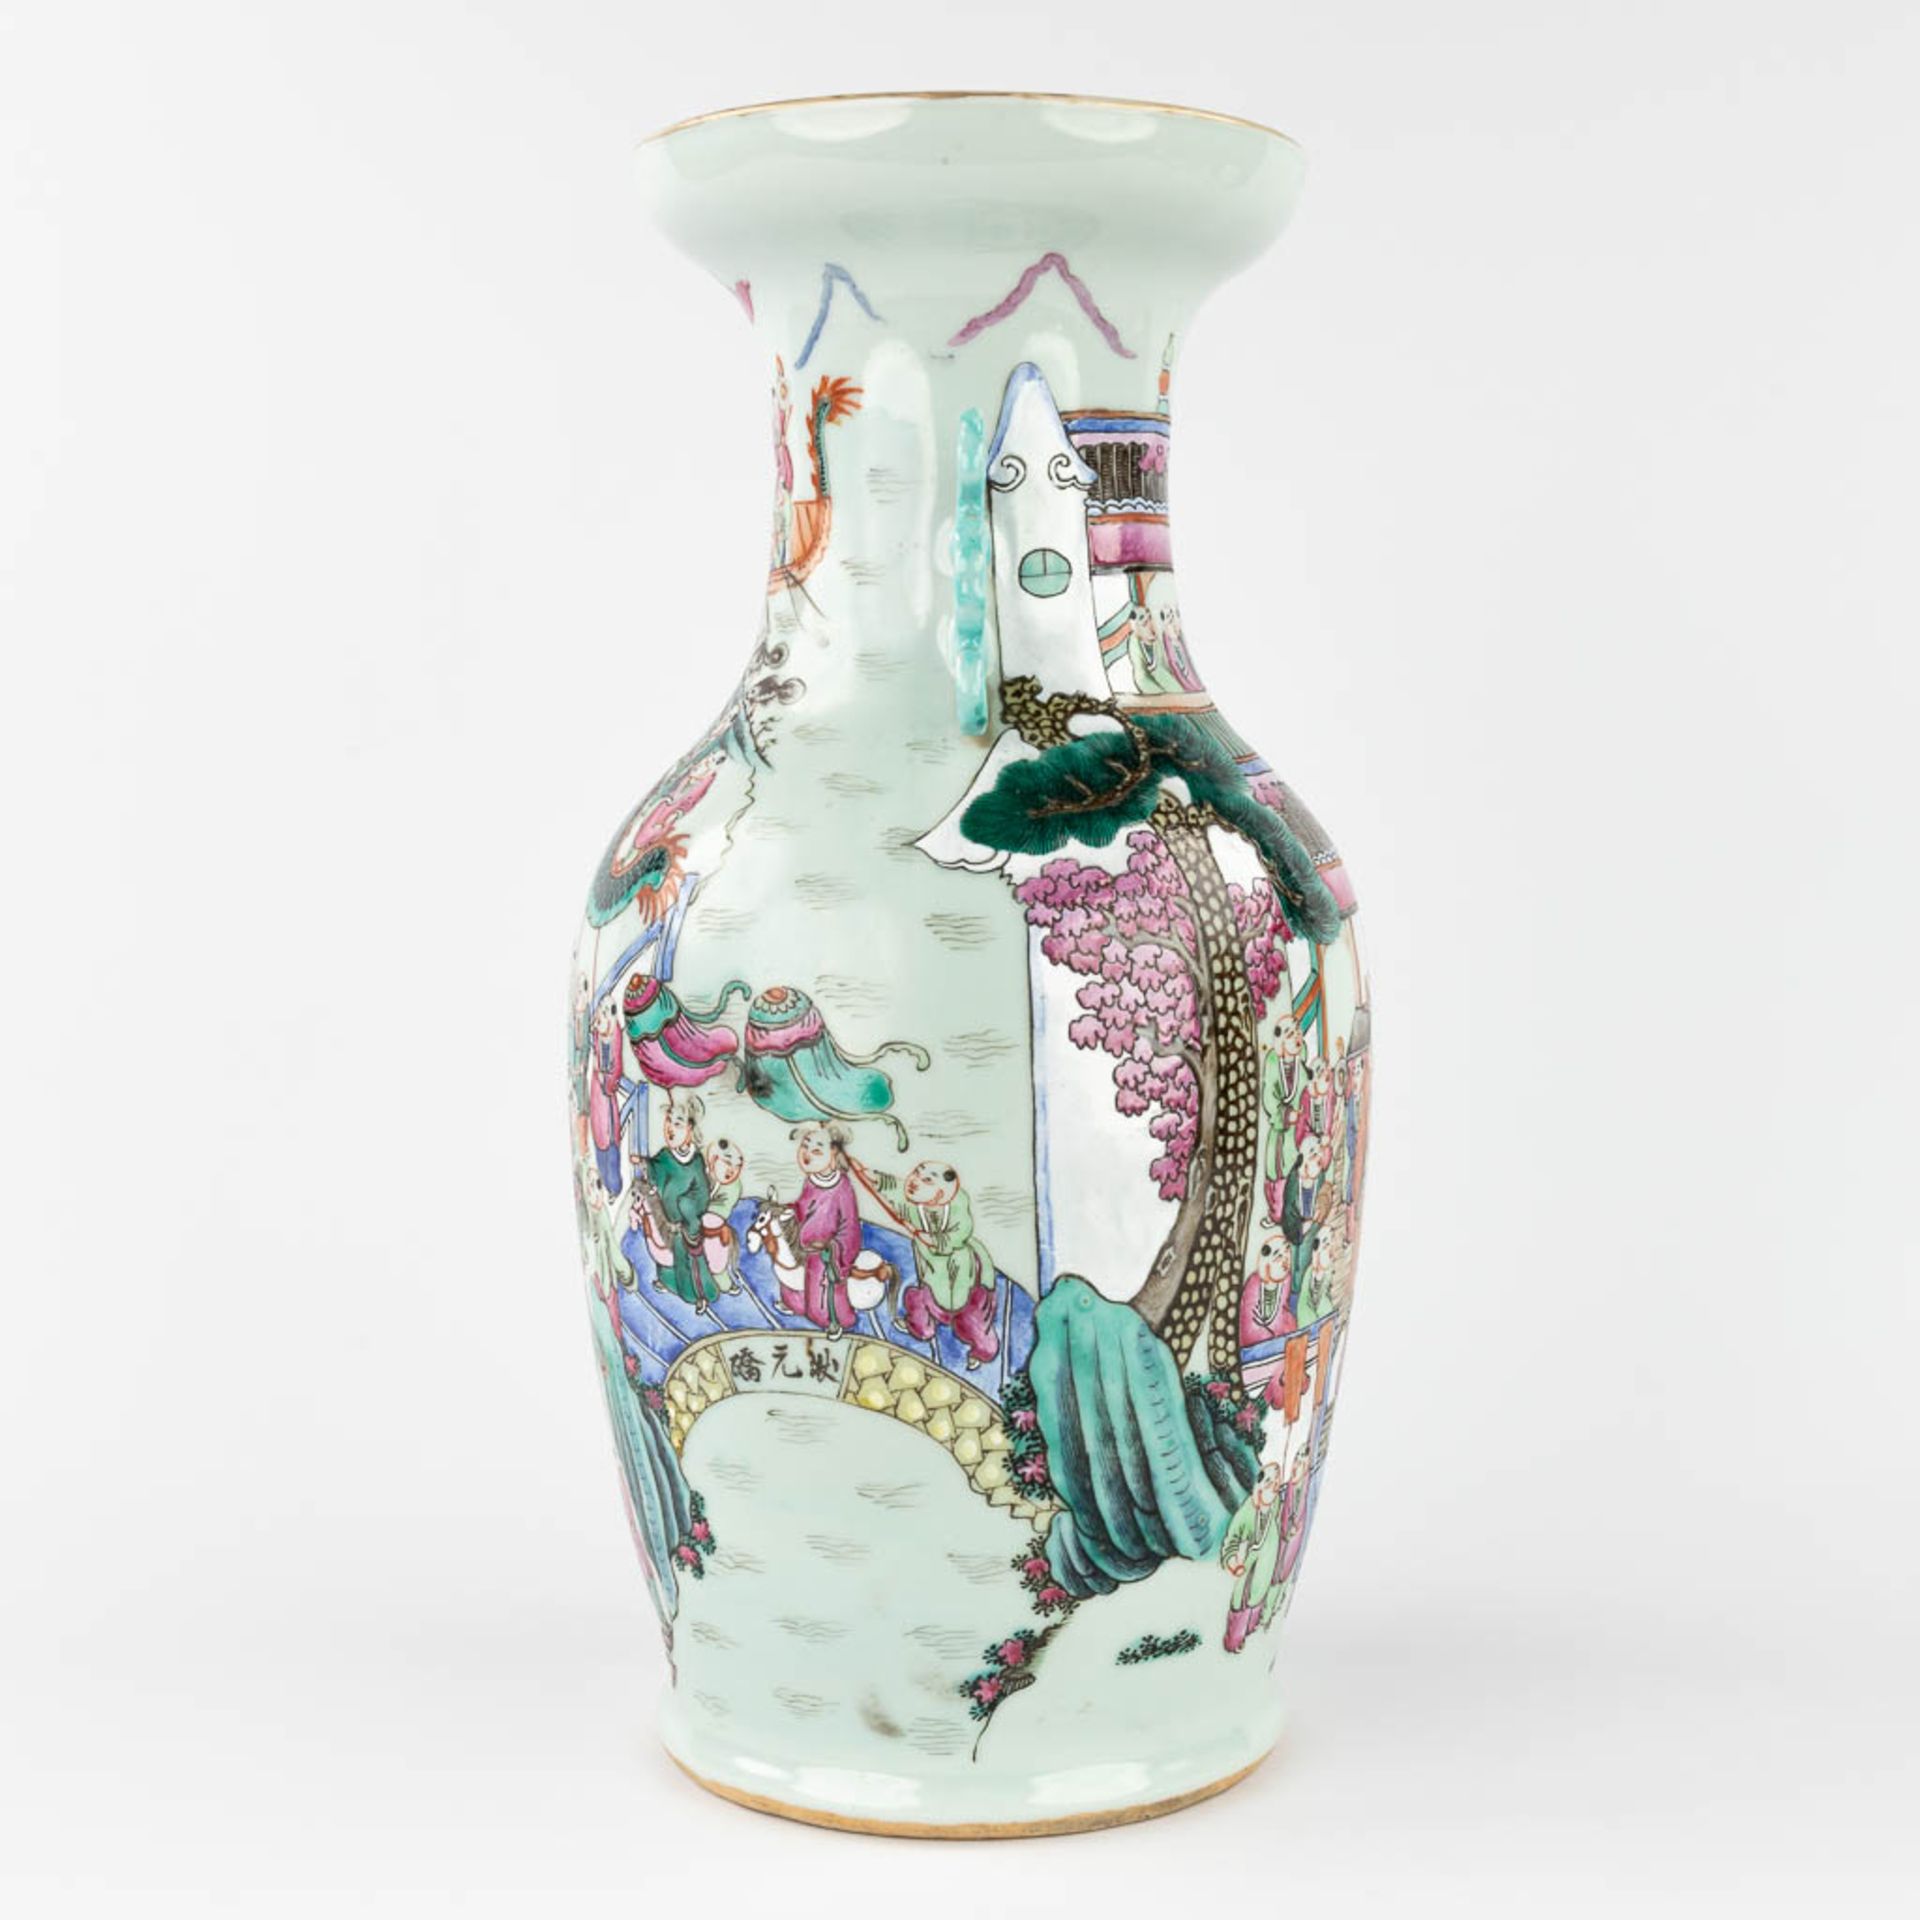 A Chinese Famille Rose '100 Boys' vase. 19th C. (H:44 x D:23 cm) - Image 6 of 13